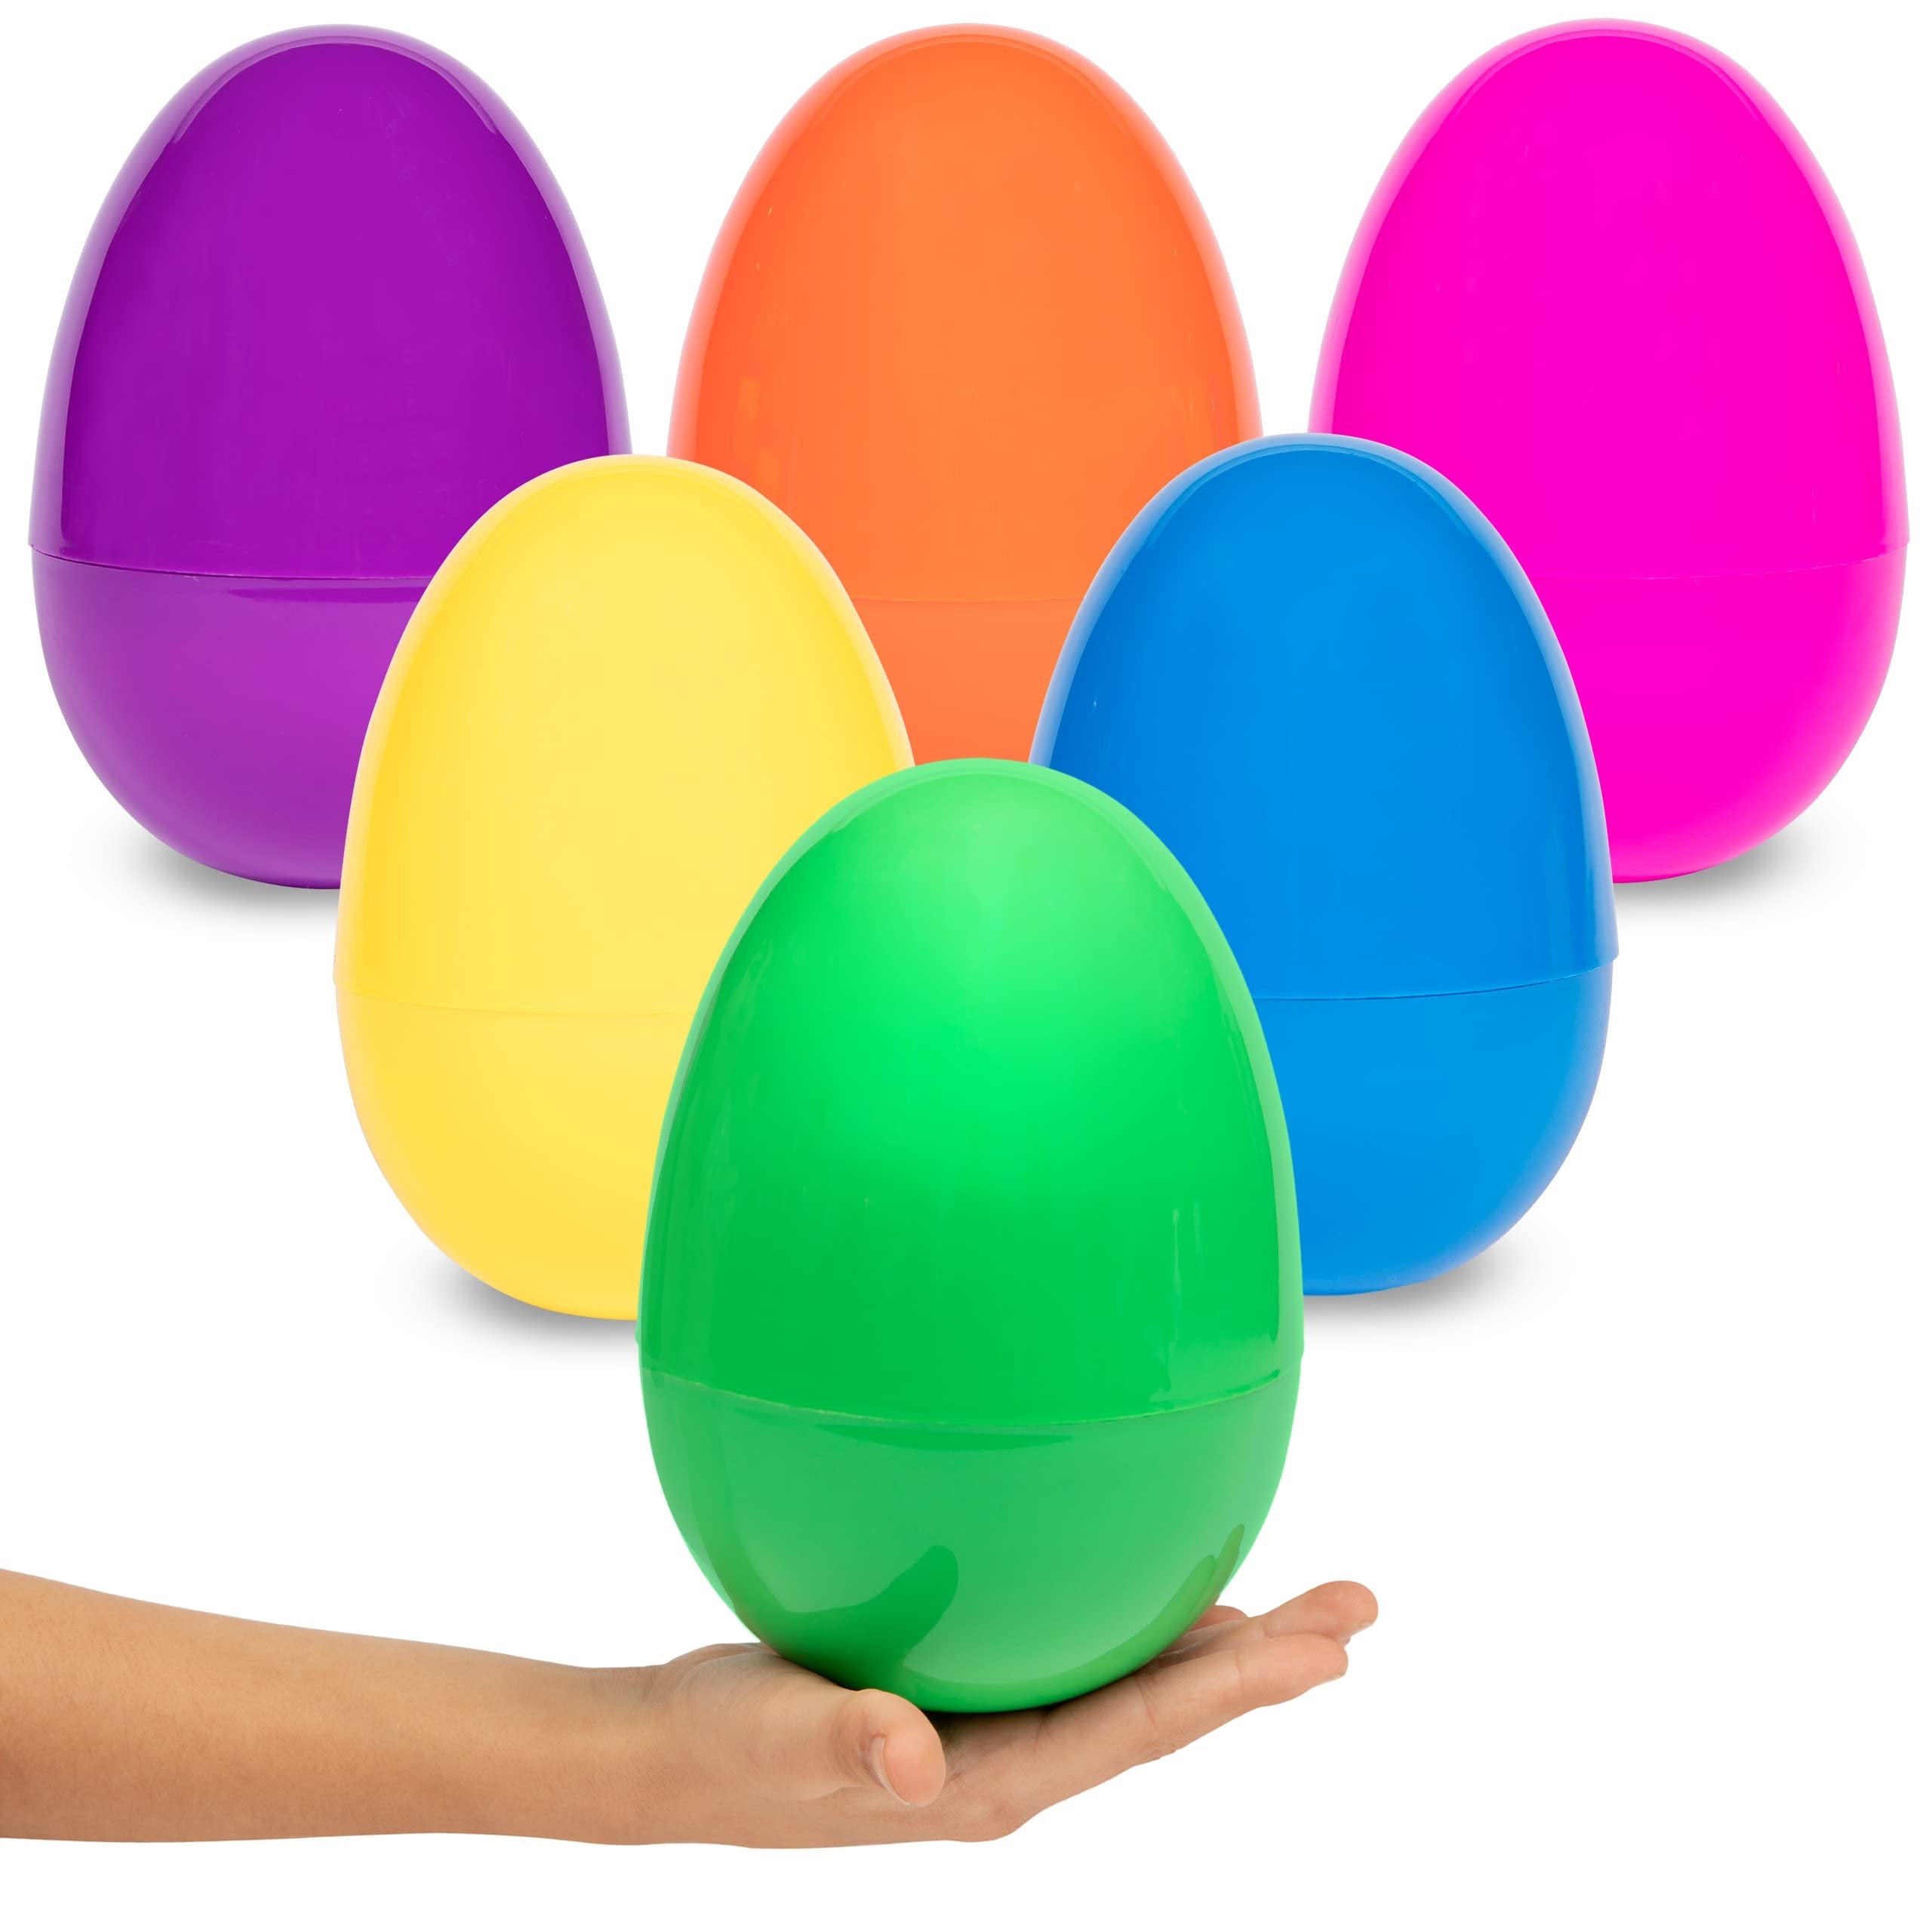 PREXTEX 7” Jumbo Unfilled Easter Eggs, 6 pcs | Empty Plastic Eggs Bulk, Egg Toy Pack, Big Giant Easter Egg, Jumbo Eggs | Large Easter Eggs Empty, Party Decoration, Color Party Pack, 6 Pack Color Eggs